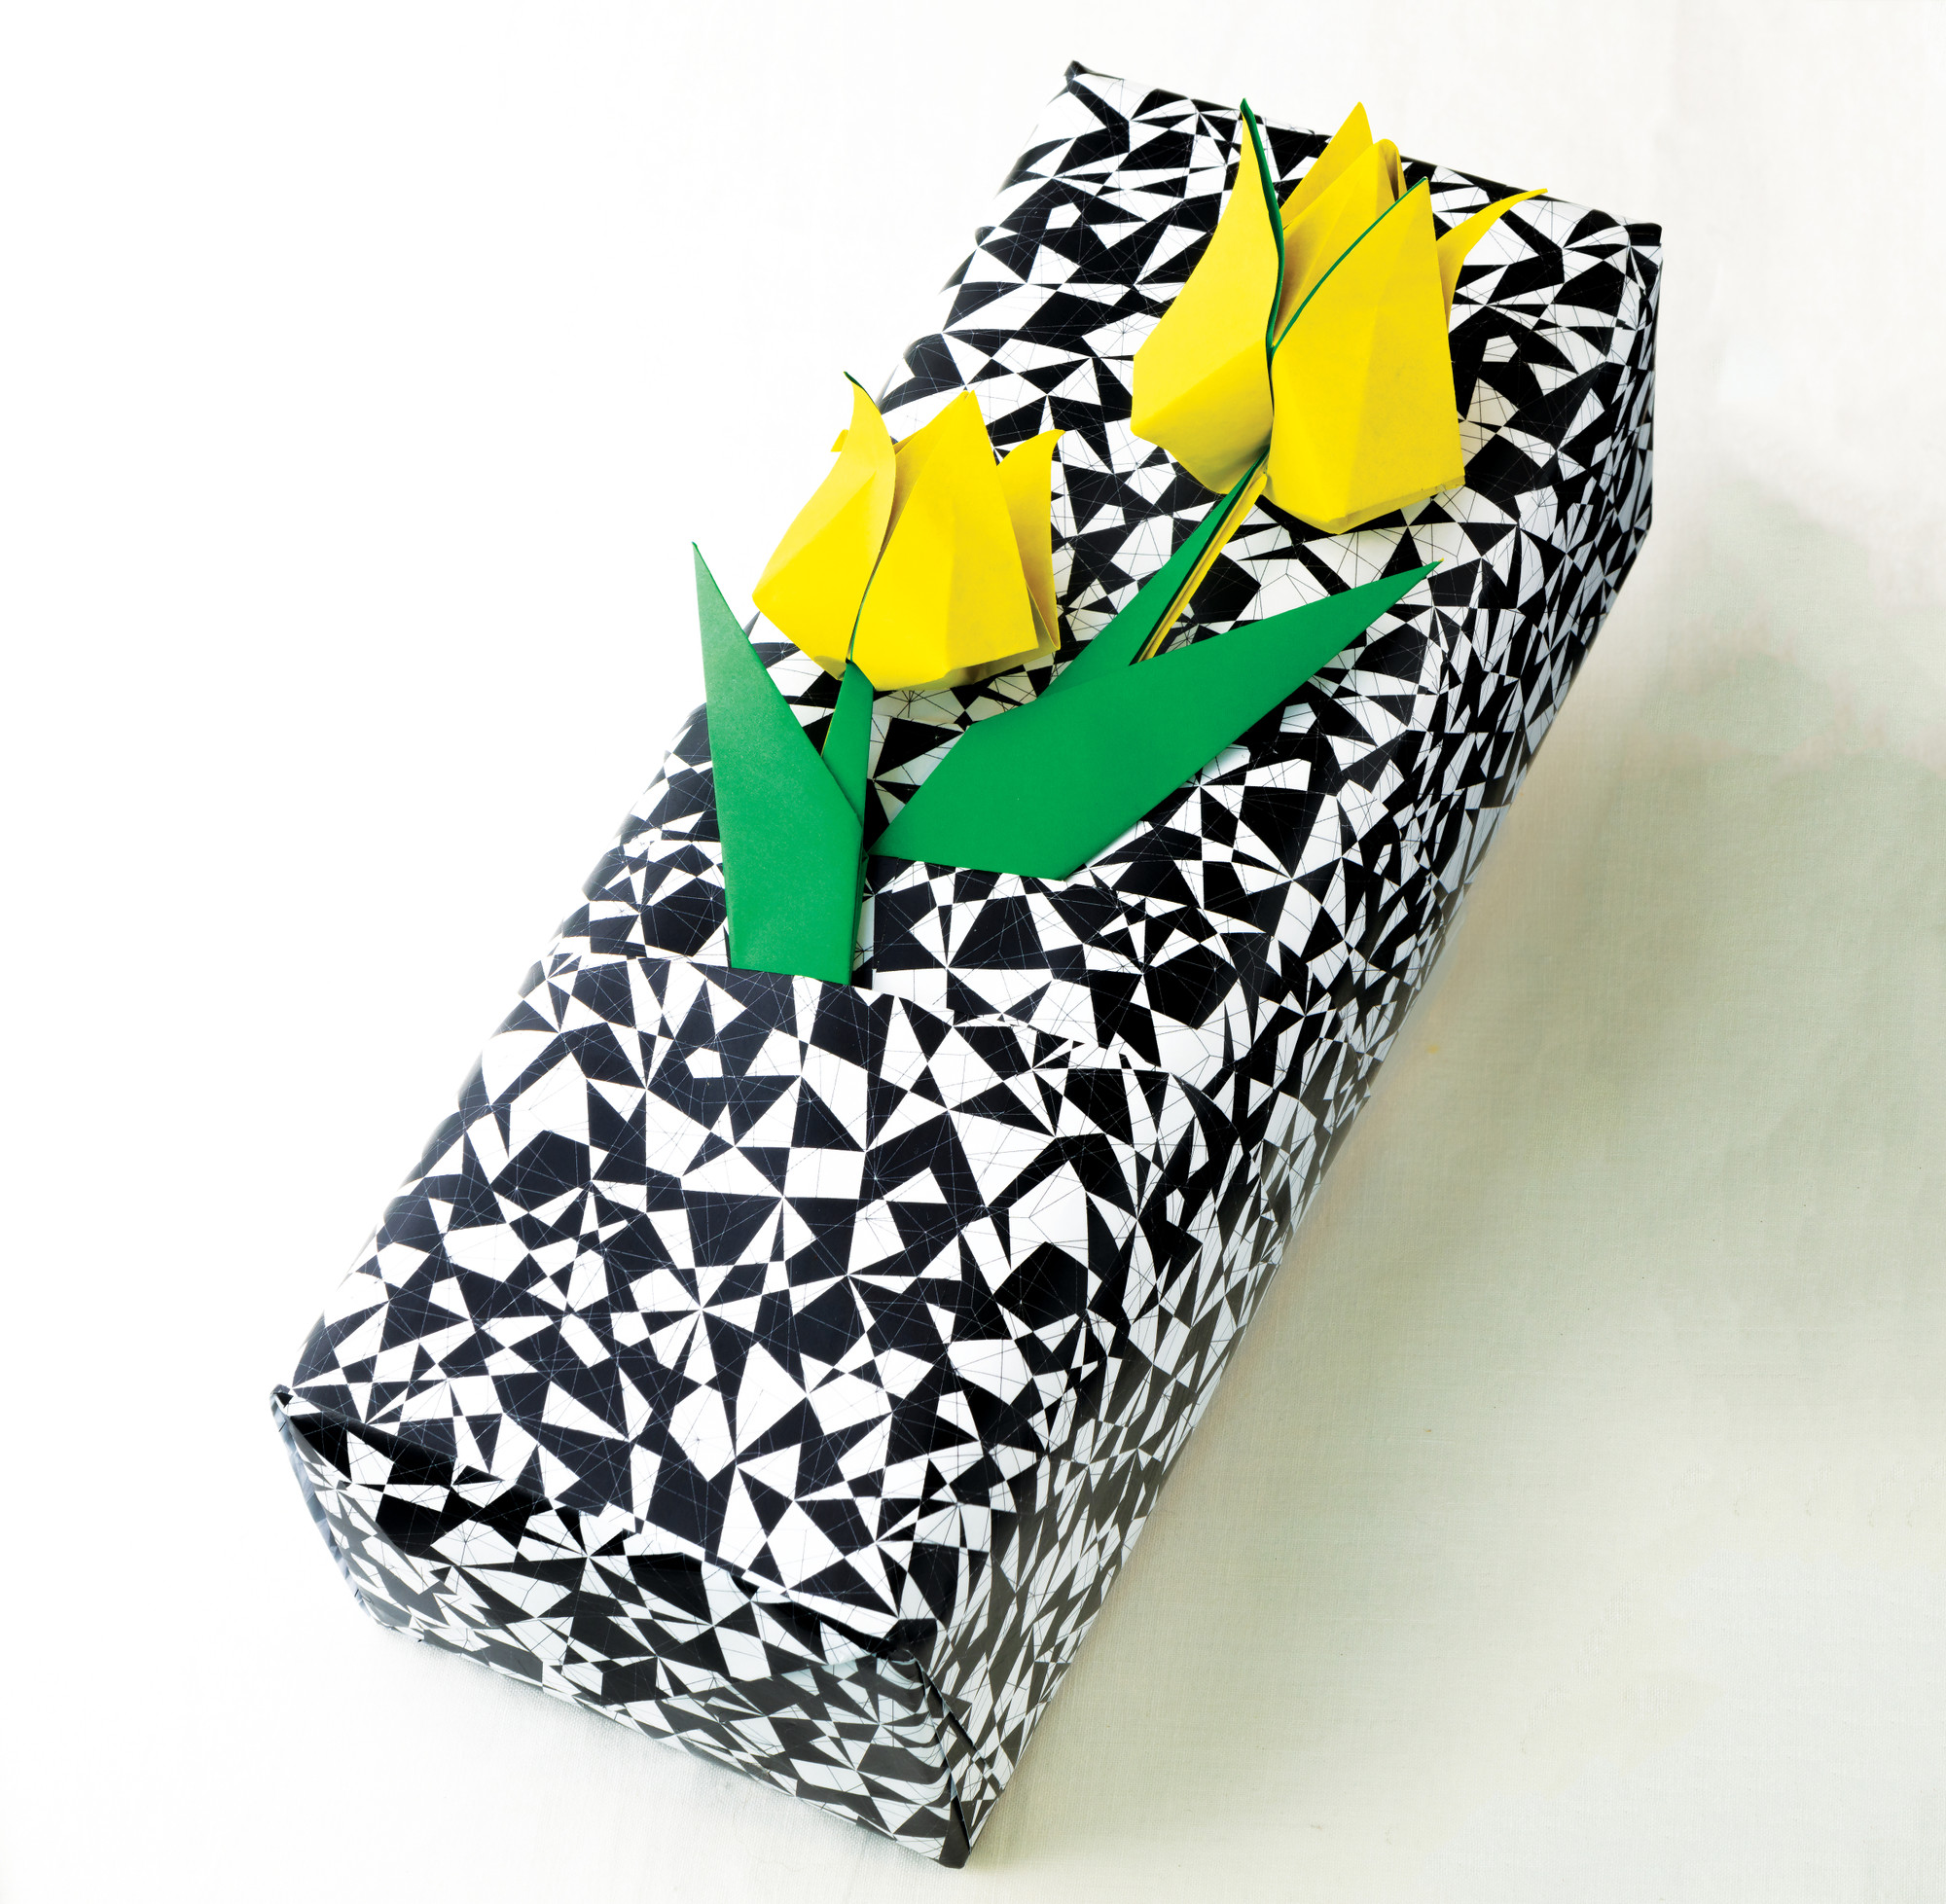 Black & Gold Gift Wrapping Papers - 12 Sheets (9780804852104